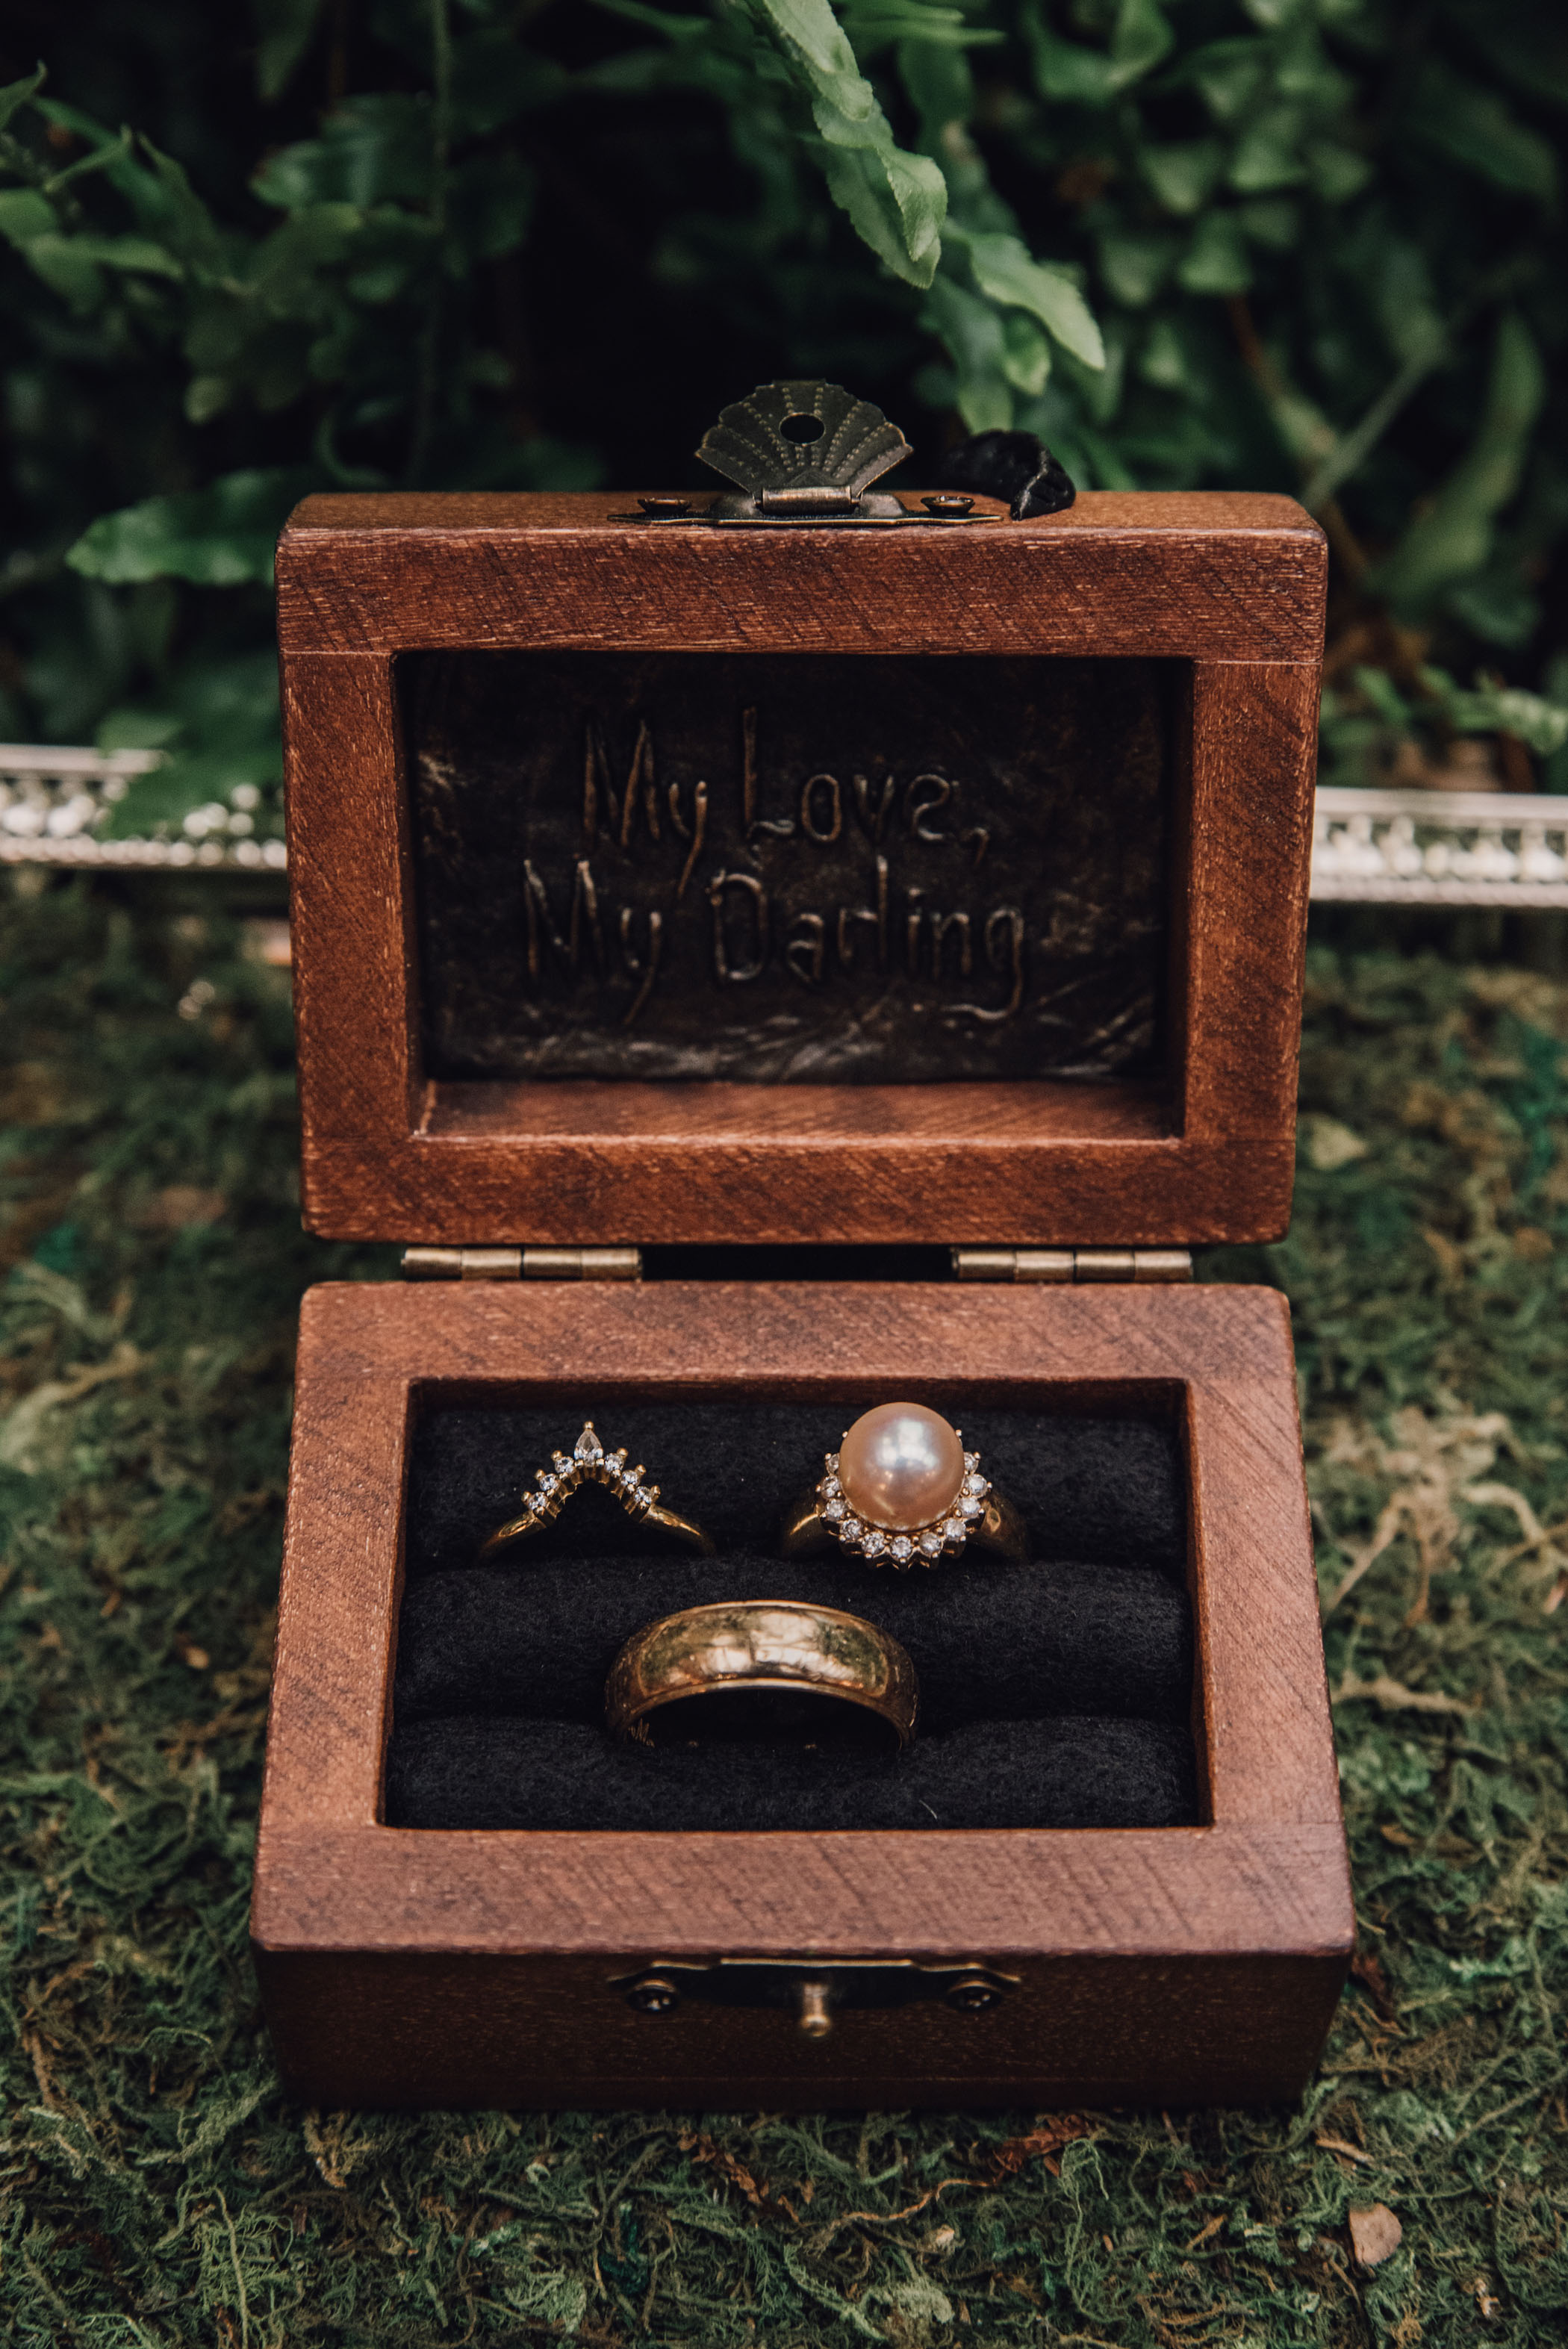 Whimsical Wizarding Wedding at The Manor New Jersey